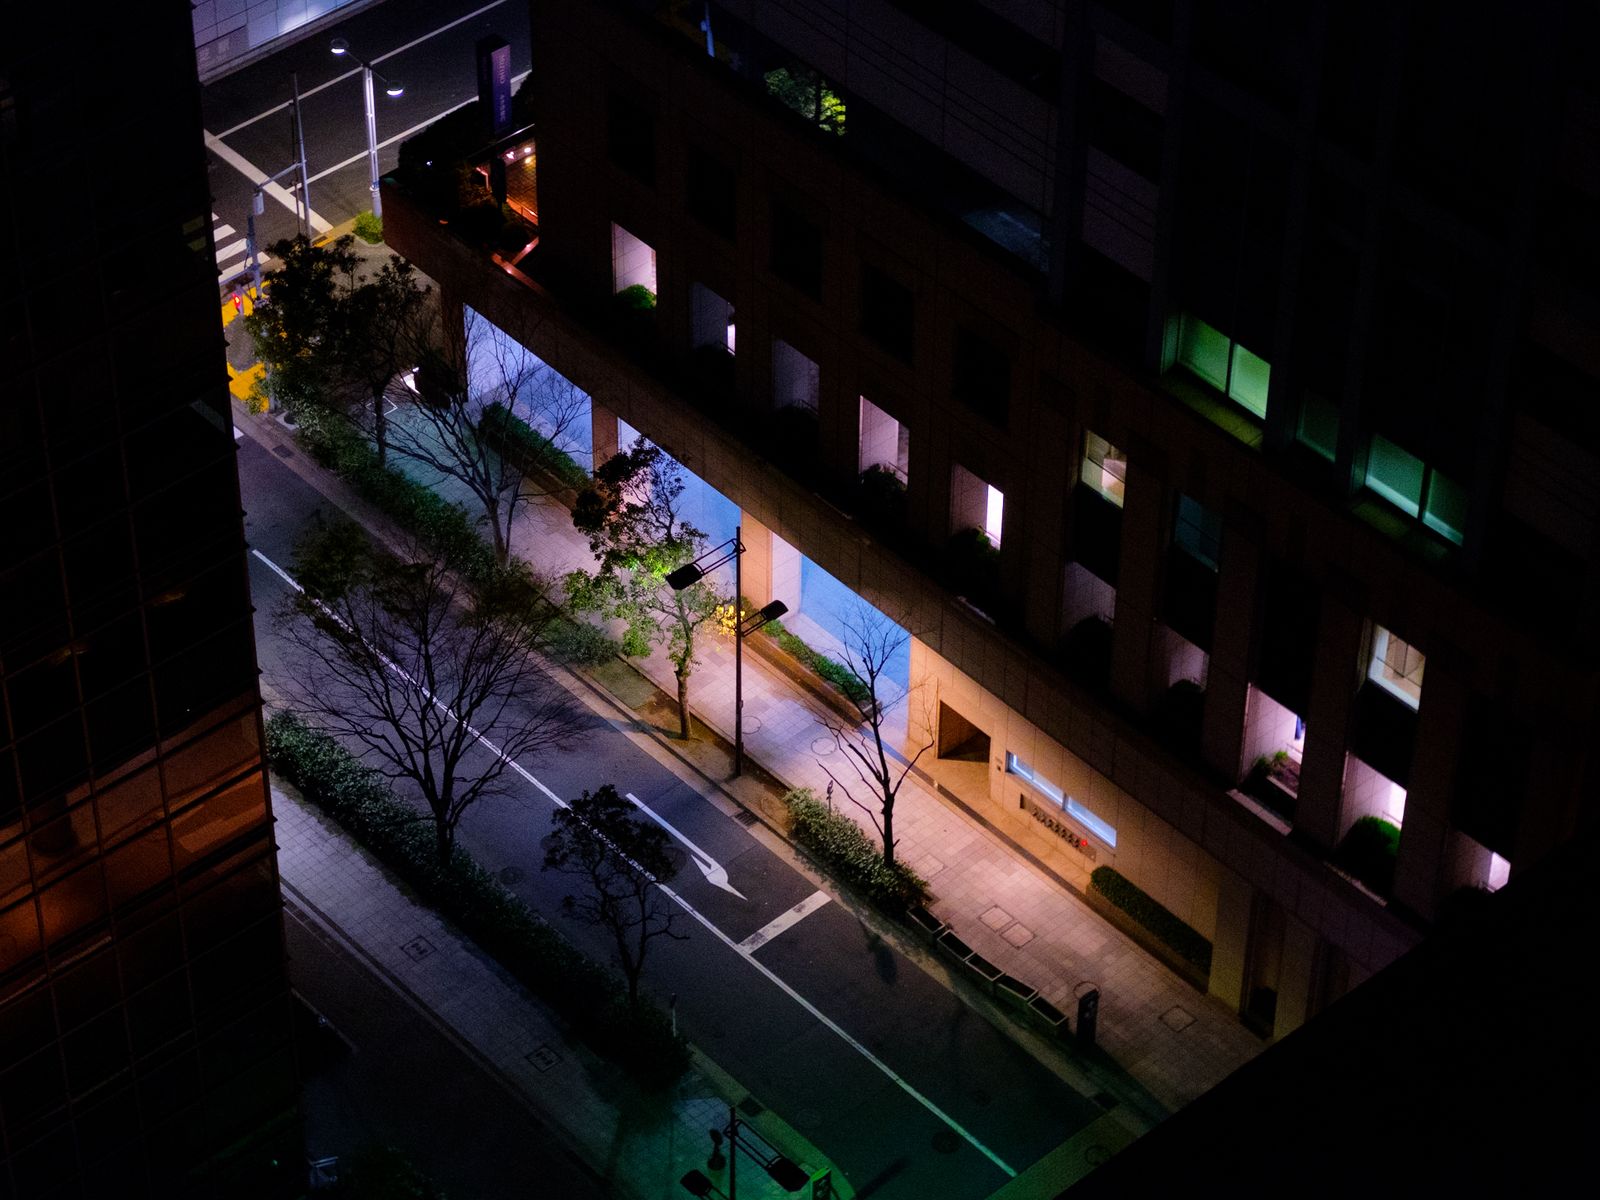 © Vincent Dupont-Blackshaw - Image from the Tokyo by Night photography project